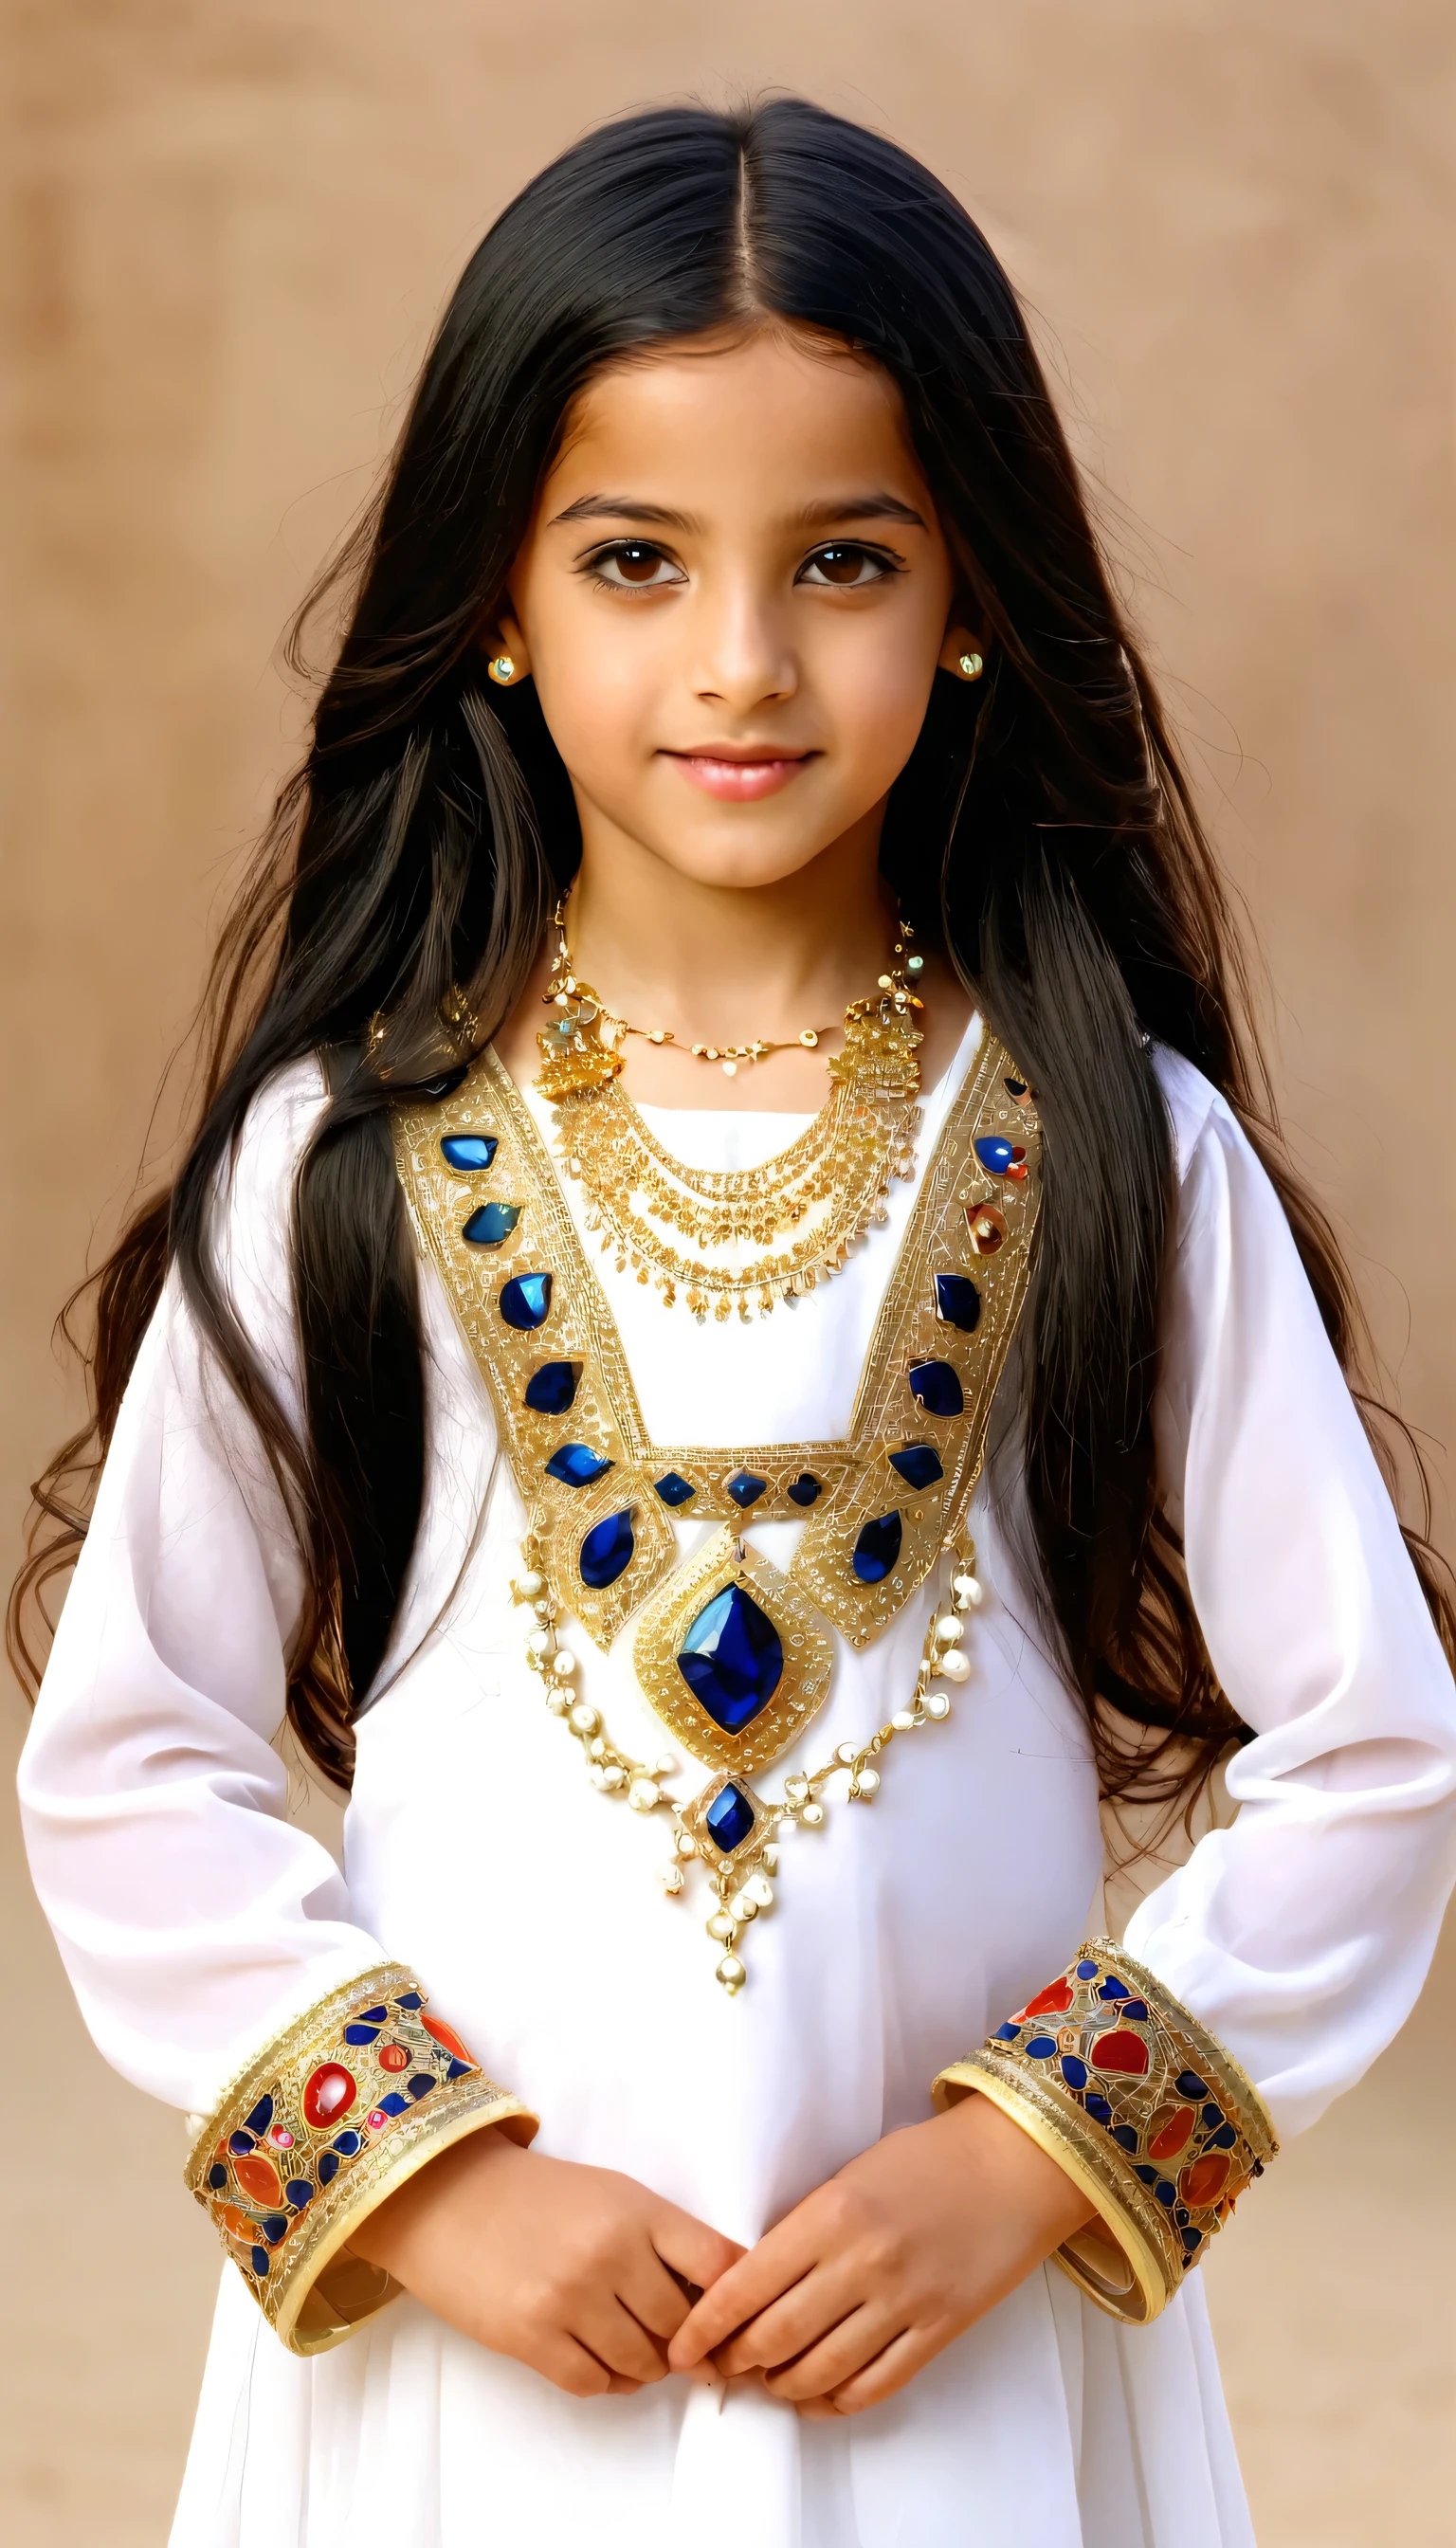 6years old Arab girl in traditional clothes, fashion accessory, embellishment, 1girl, solo, realistic, dress, looking_at_viewer, long_hair, jewelry, black_hair, long_sleeves, necklace